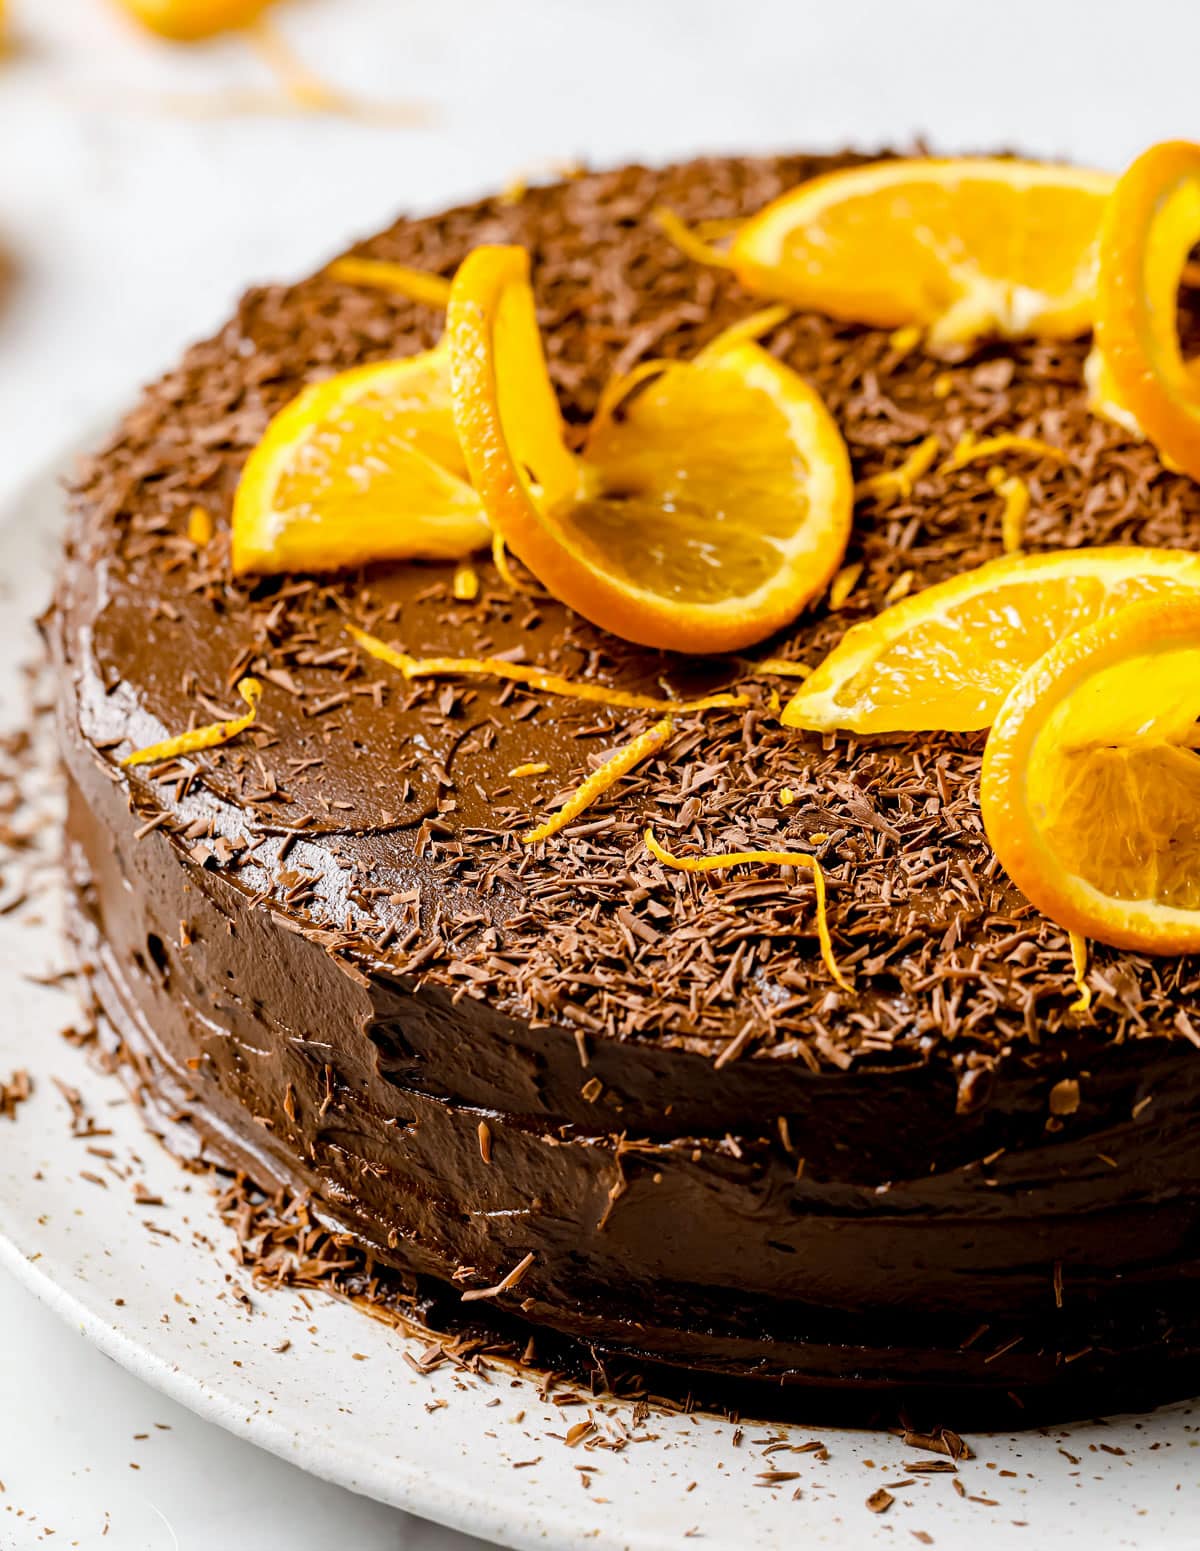 A low carb chocolate cake with orange slices on a plate